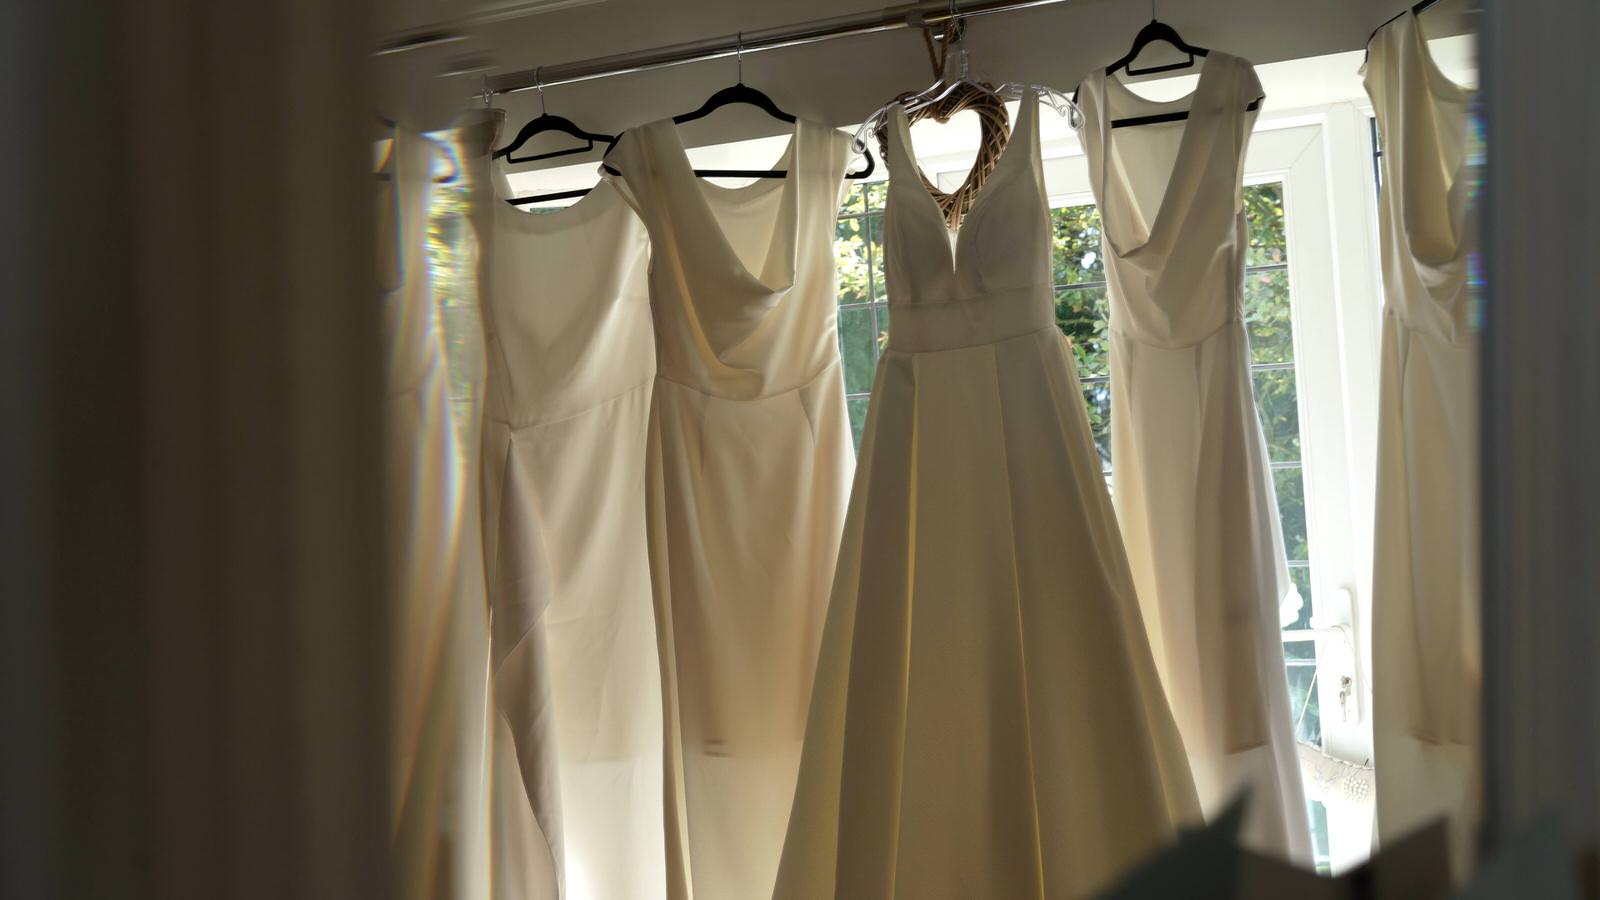 video still of wedding dress and white bridesmaid dresses hanging